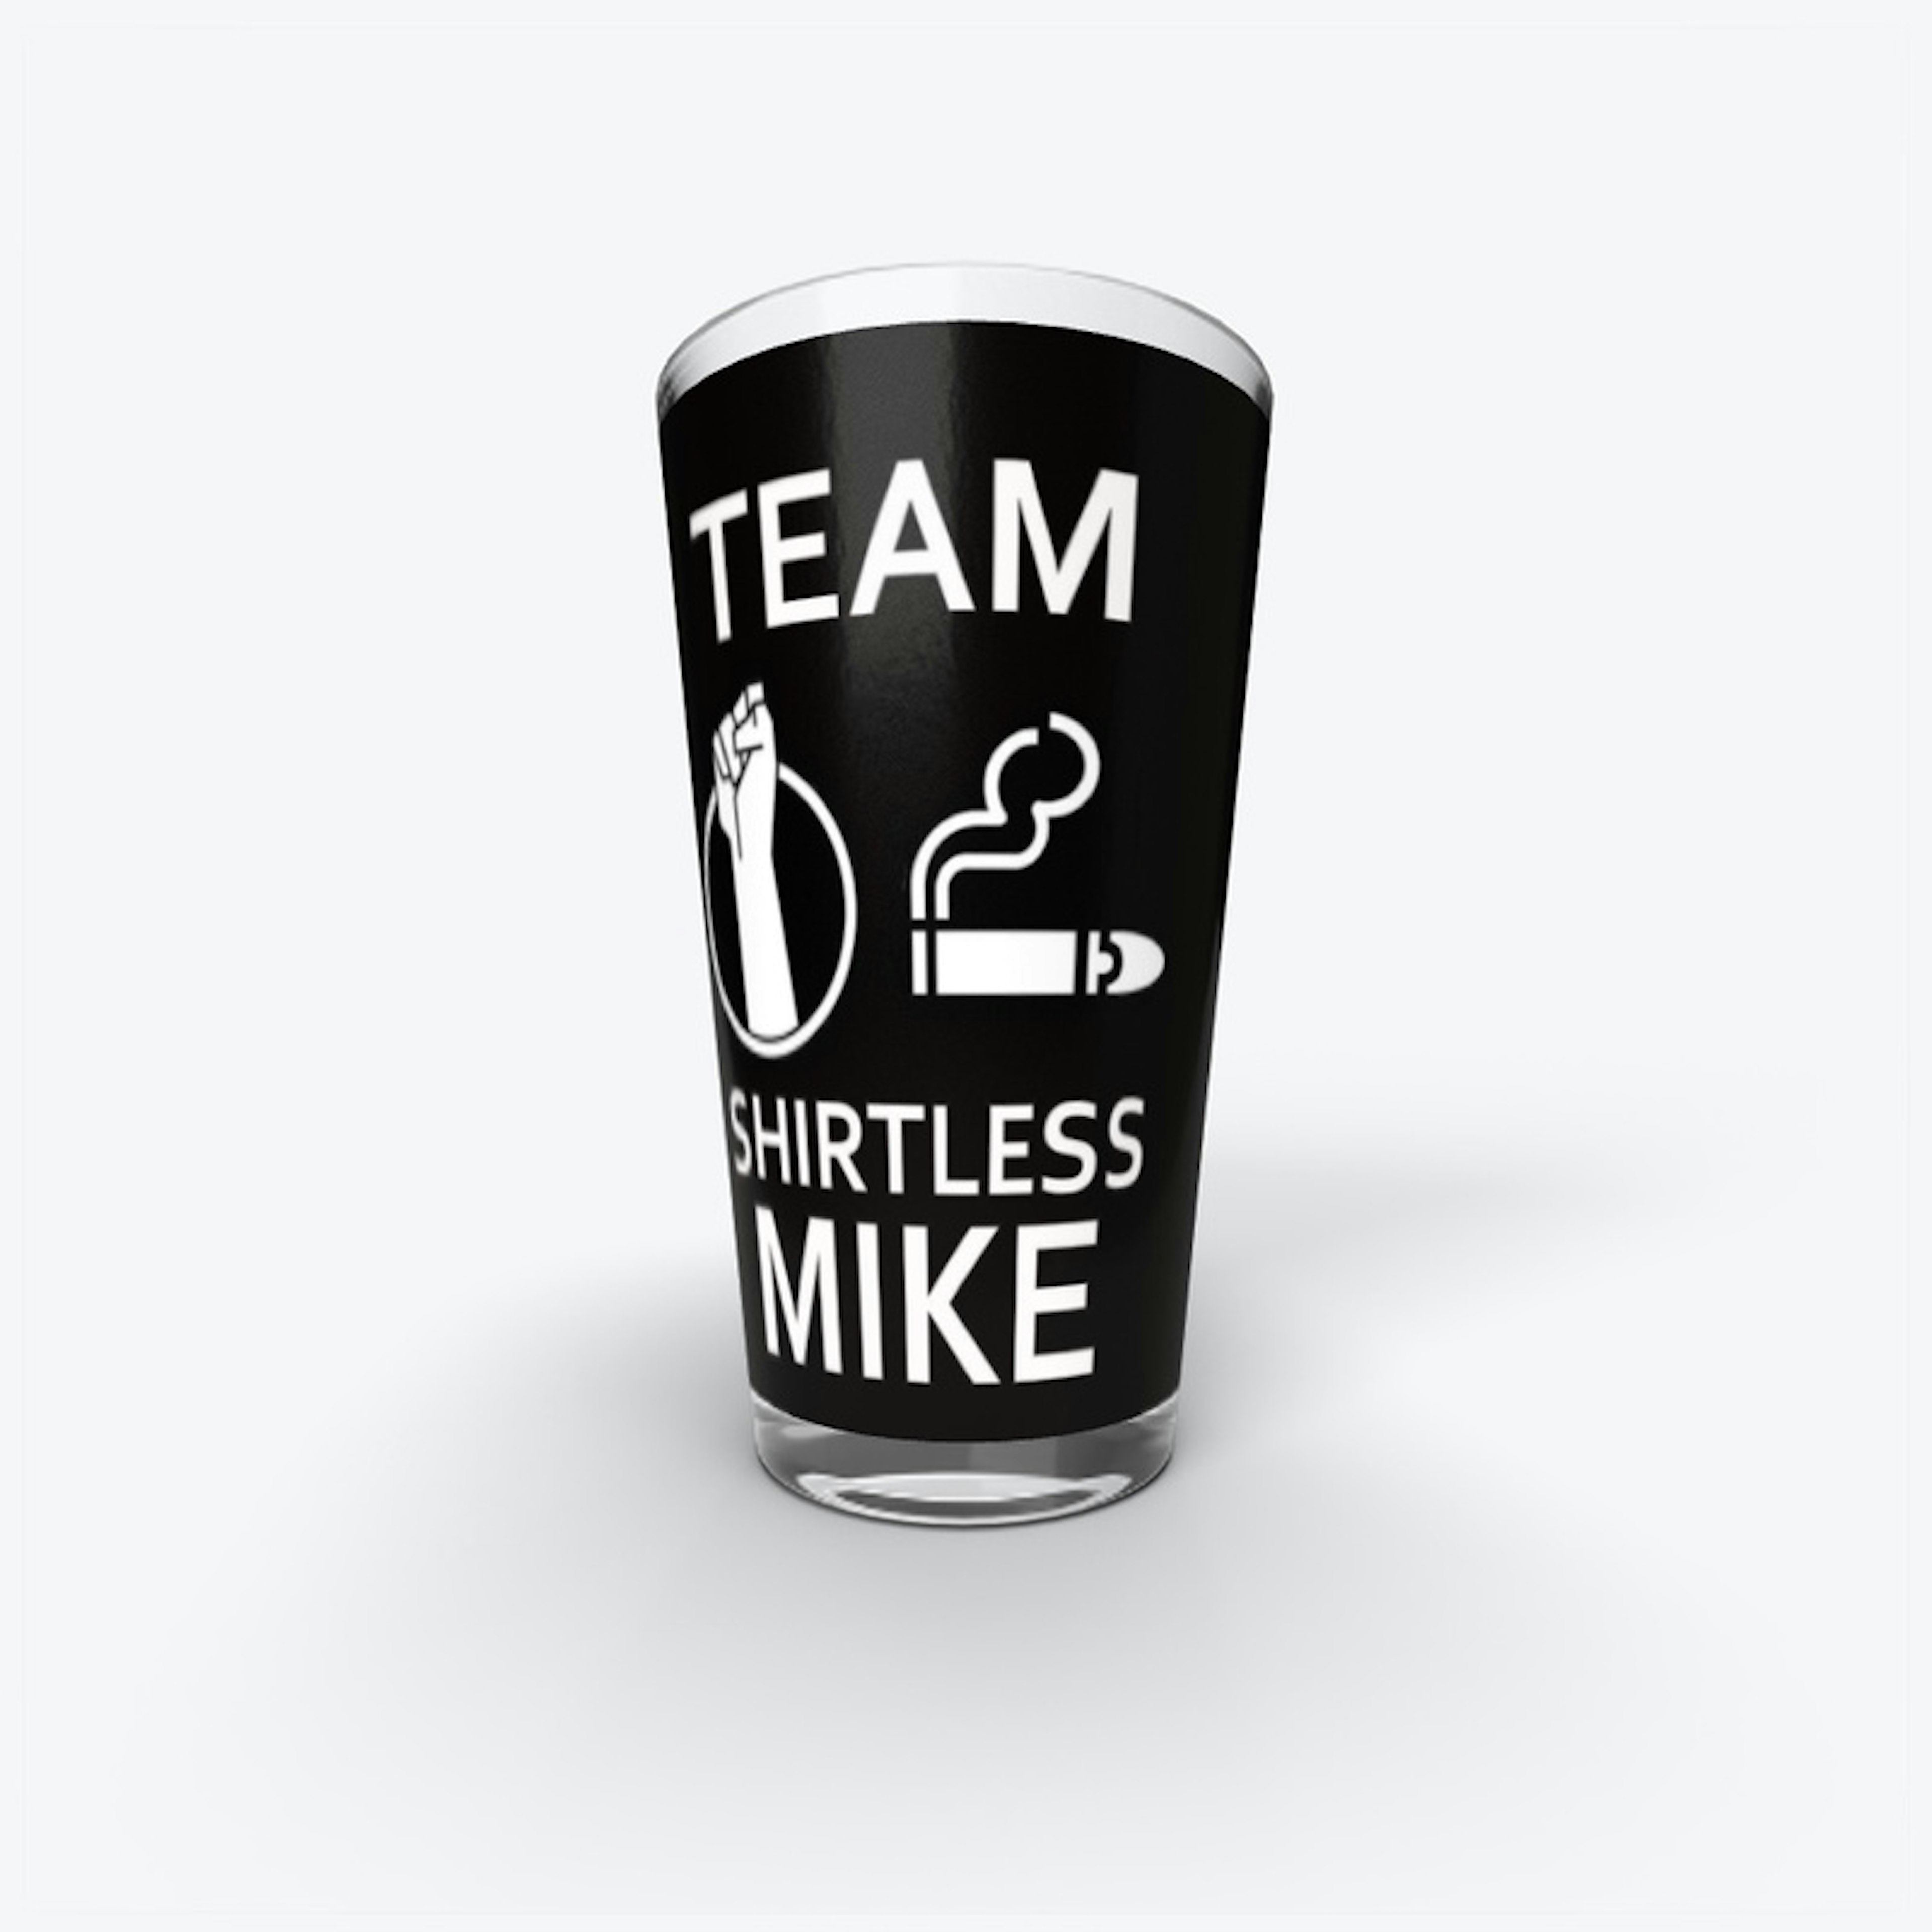 Team shirtless Mike Beer Glass 